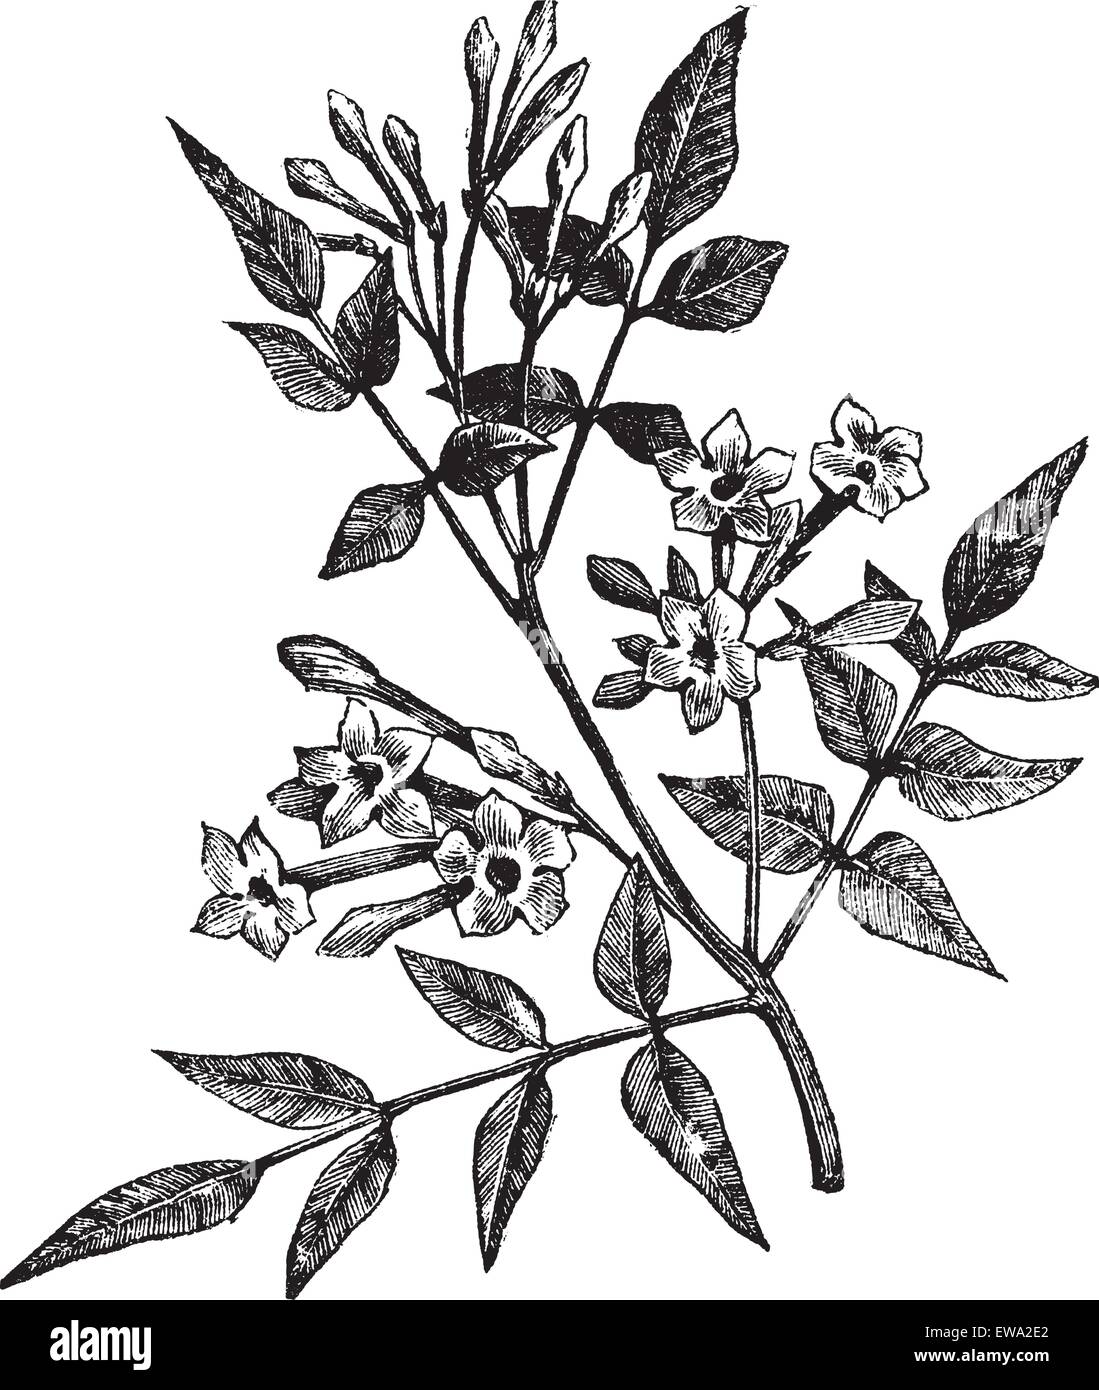 Common Jasmine or Jasminum officinale or Poet's Jasmine or Jessamine, vintage engraving. Old engraved illustration of Common Jasmine isolated on a white background. Stock Vector